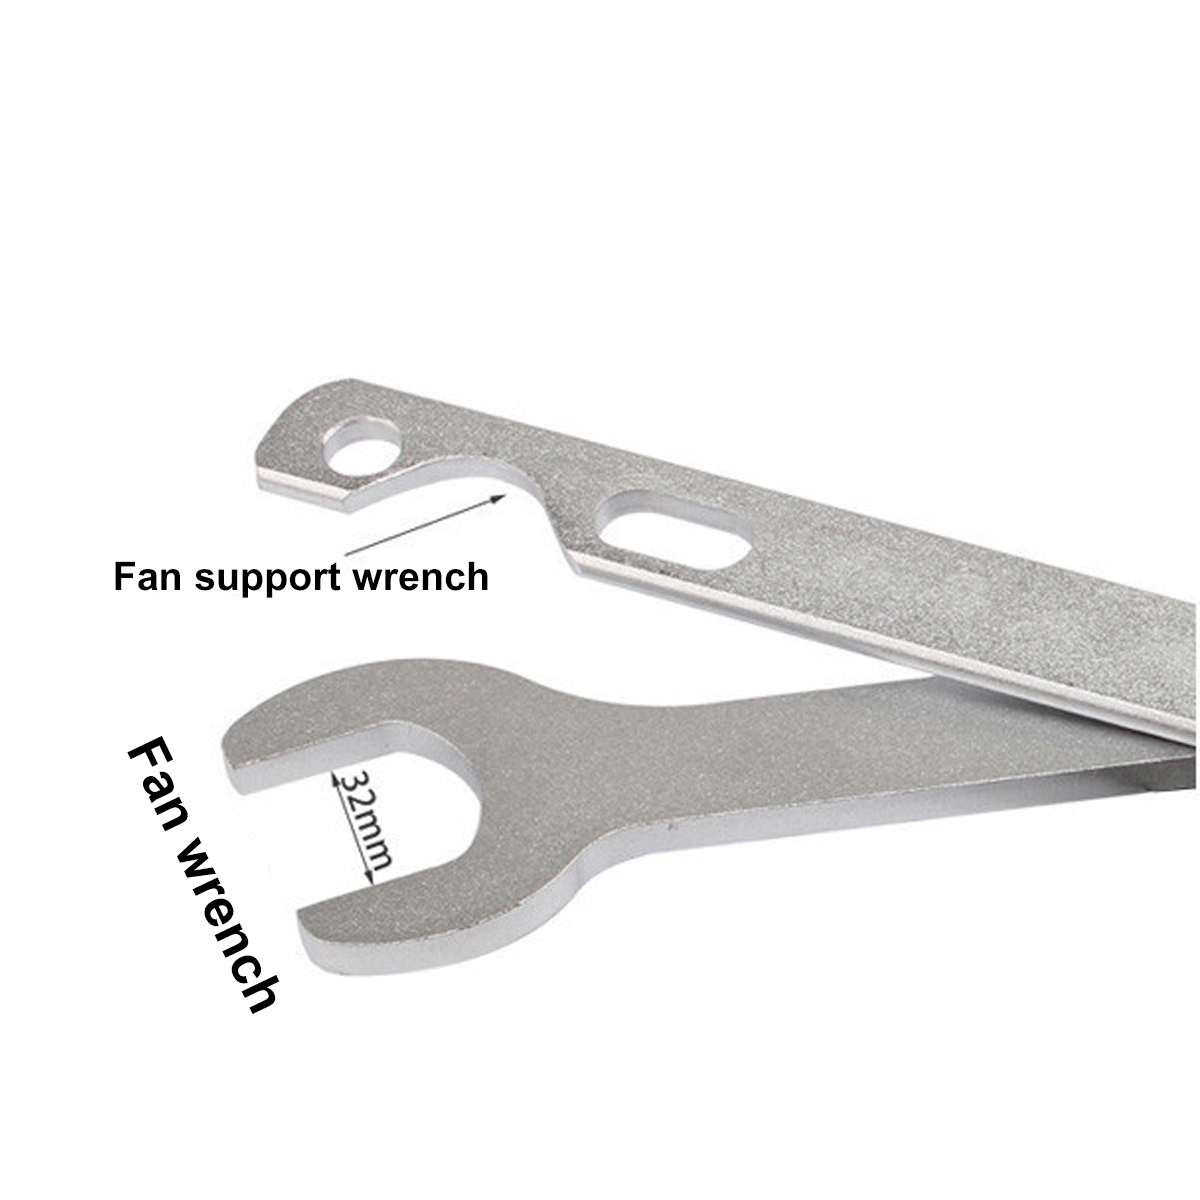 32mm-Fan-Clutch-Nut-Wrench-and-Water-Pump-Holder-Tool-Kit-Removal-Wrench-1900883-8